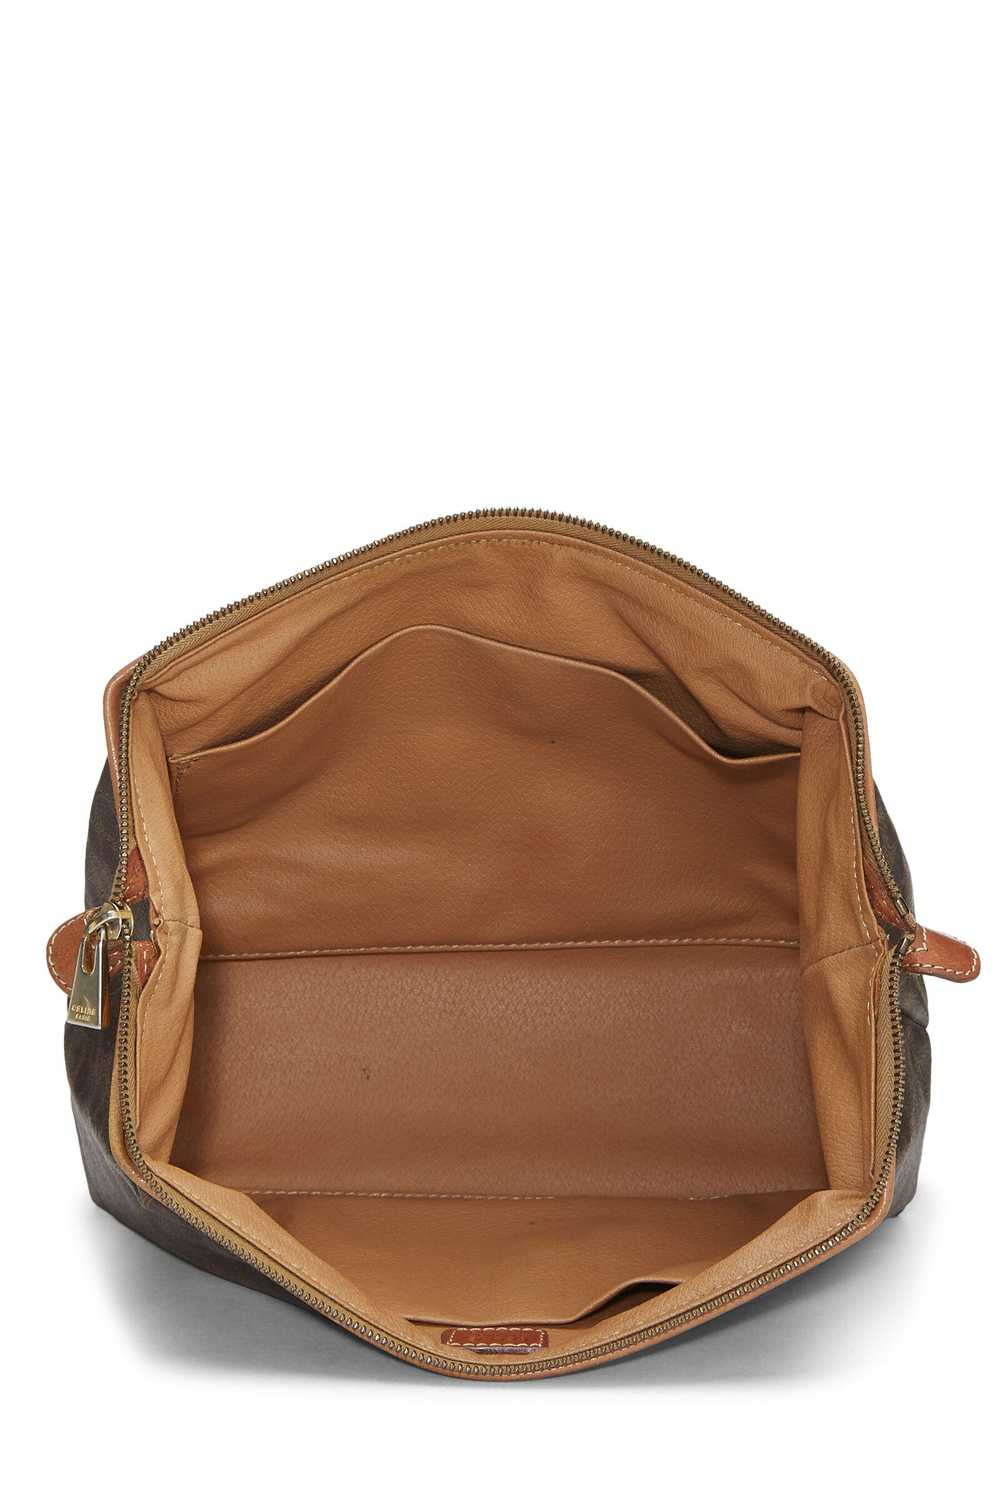 Brown Coated Canvas Macadam Pouch - image 4